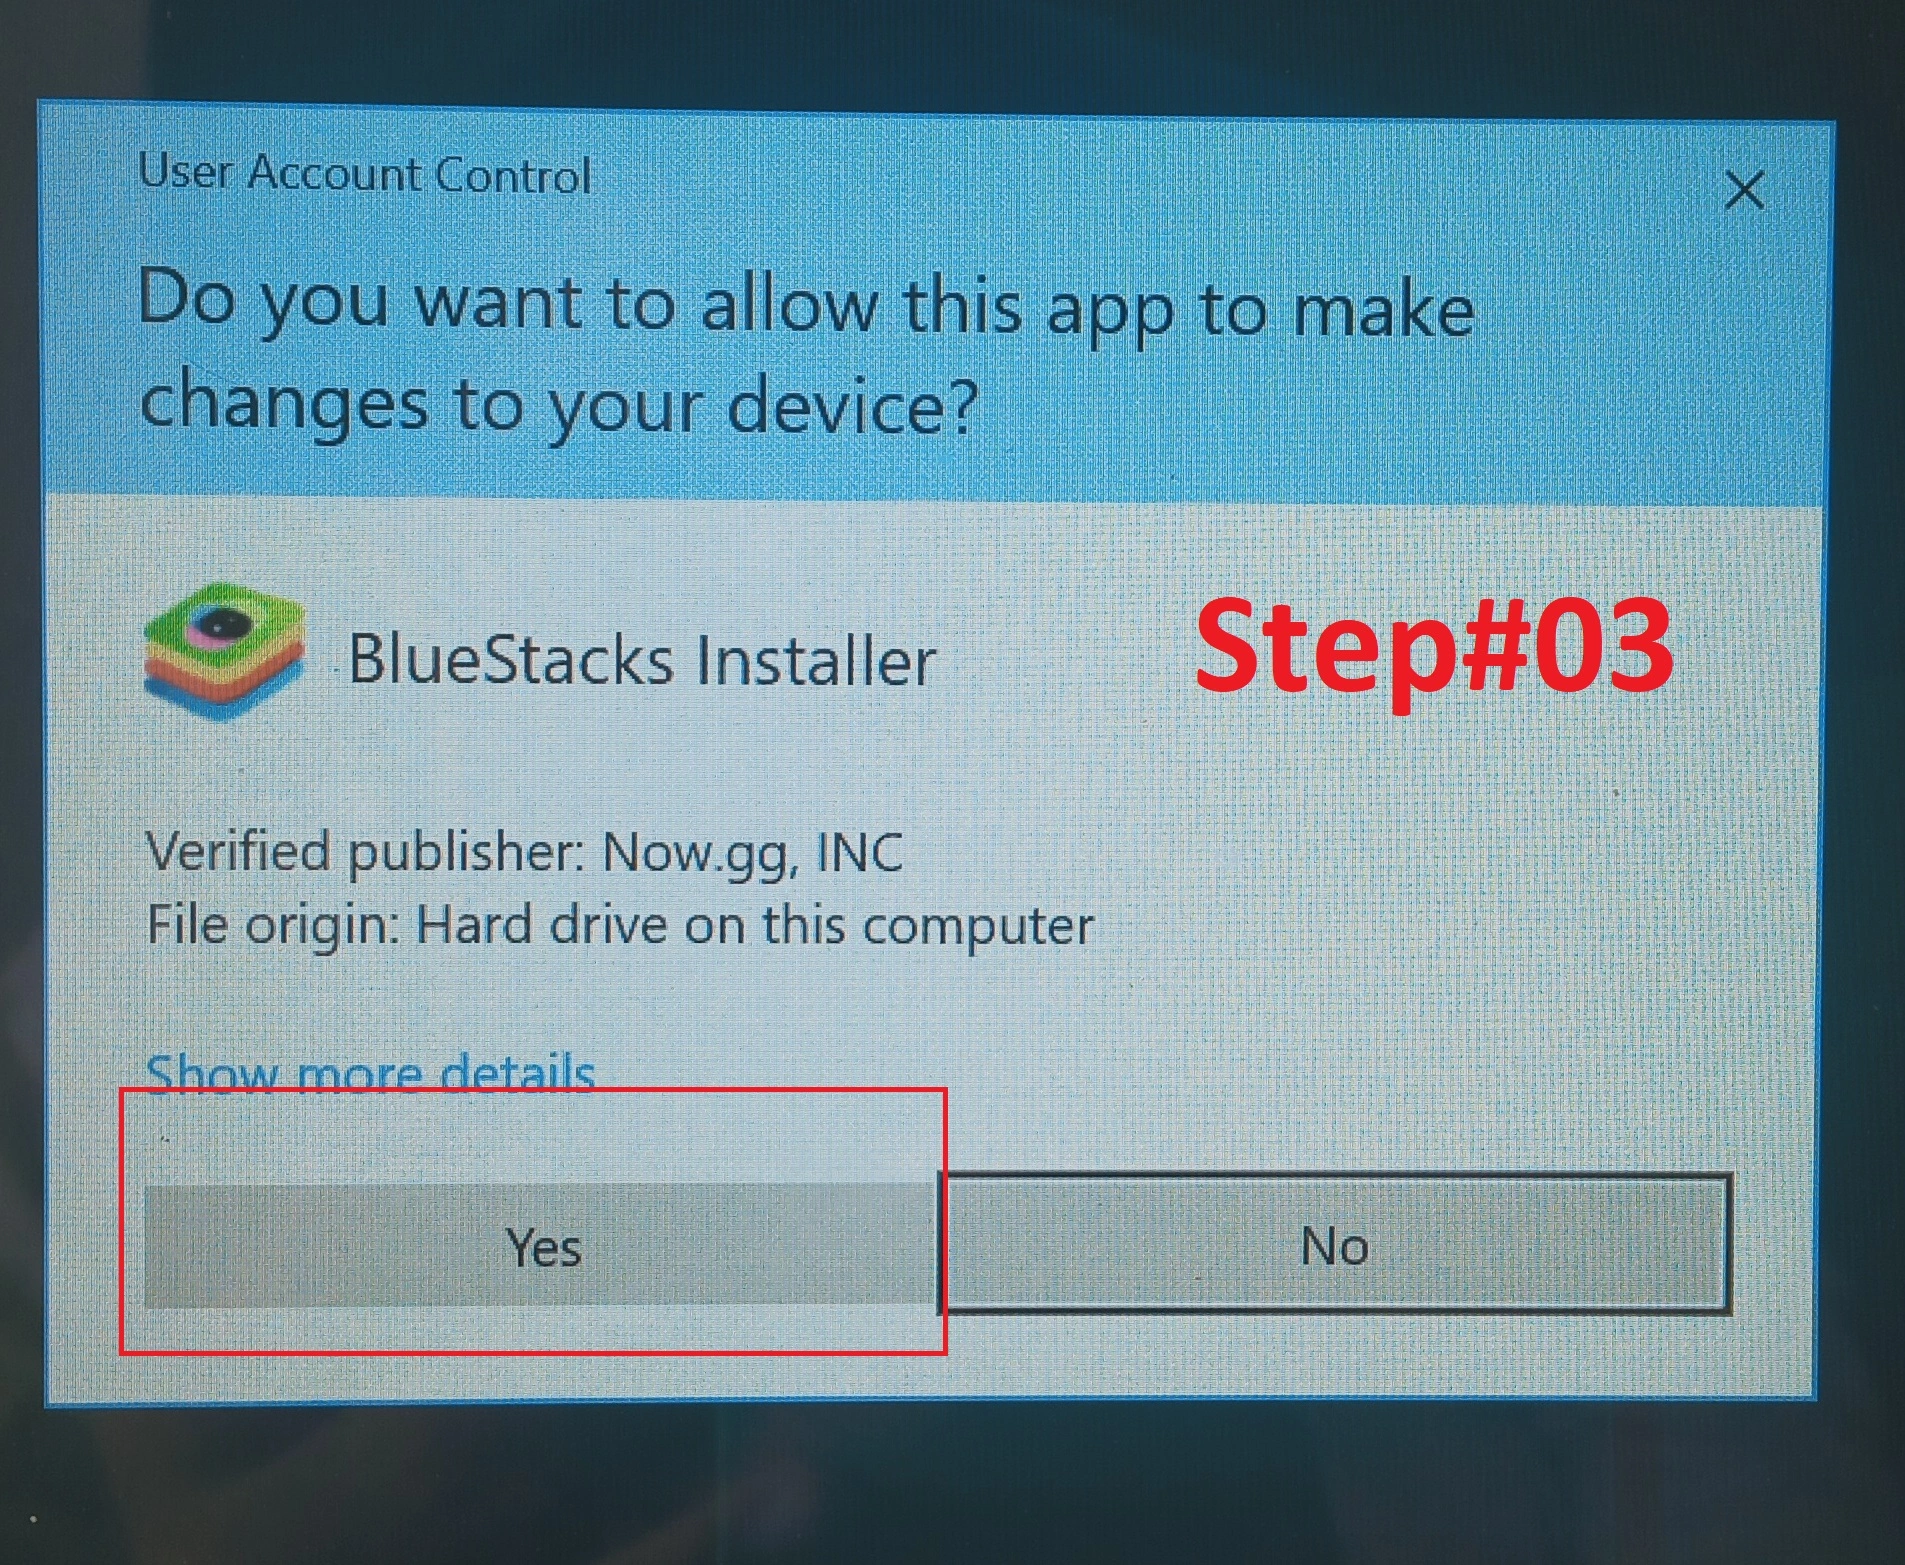 Now click on Yes to access your control panel